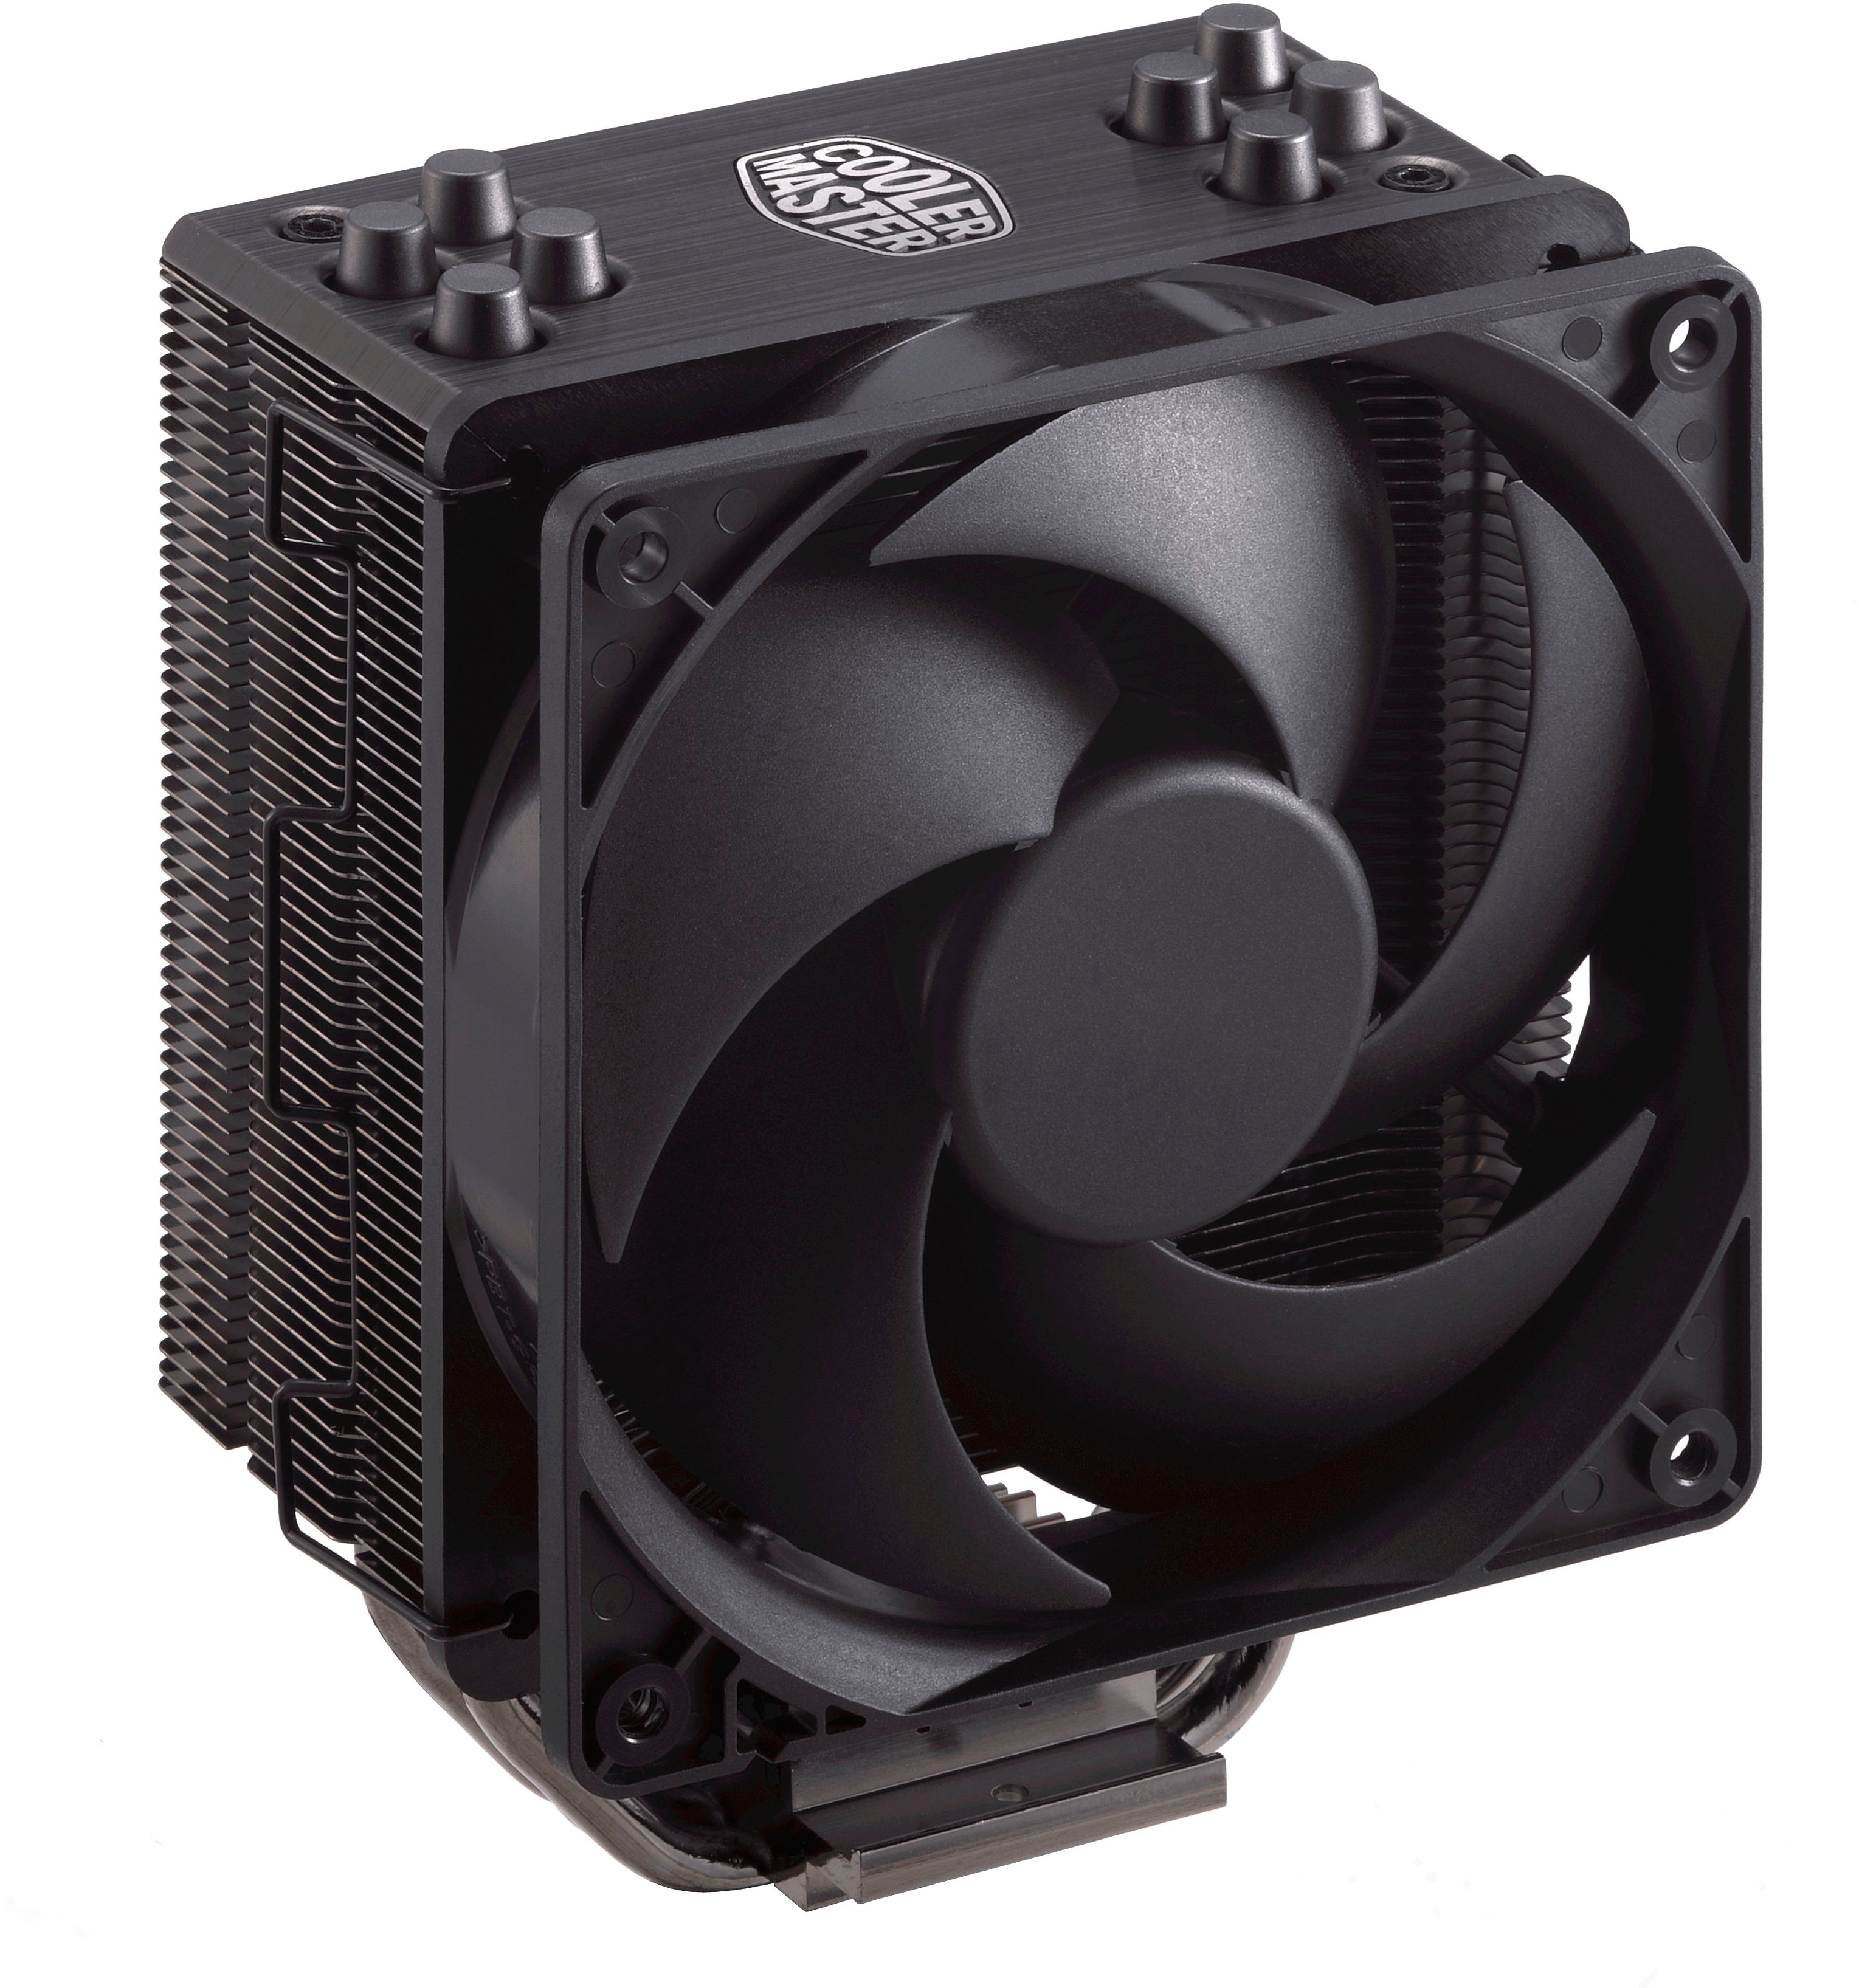 Cooler Master Presents Redesigned Hyper 212 Halo Series CPU Coolers